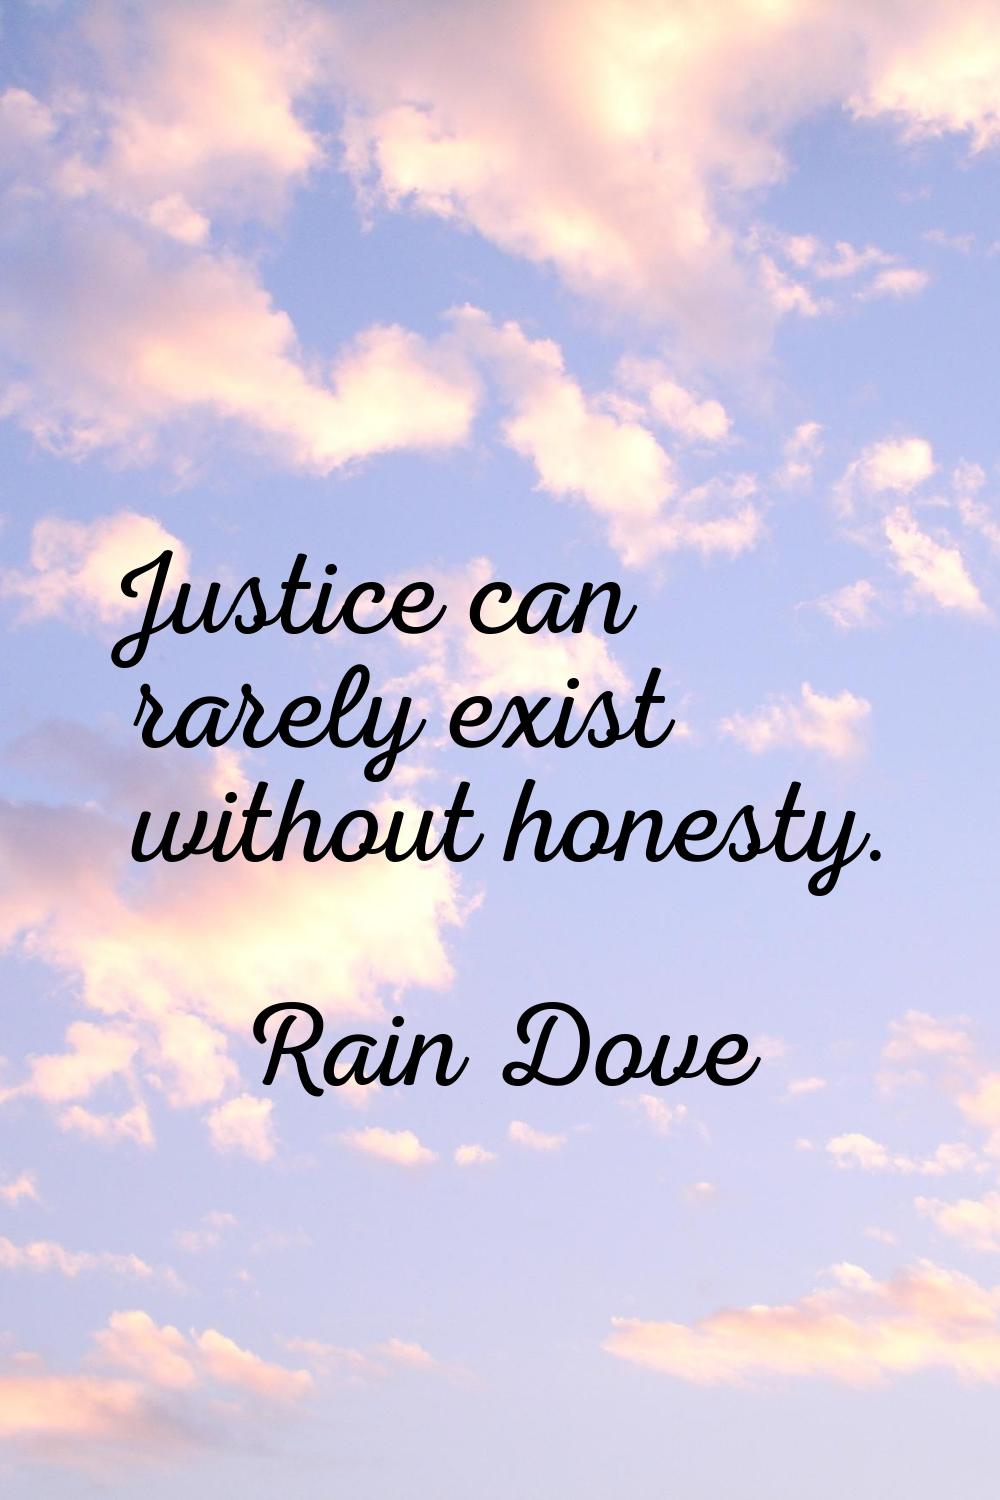 Justice can rarely exist without honesty.